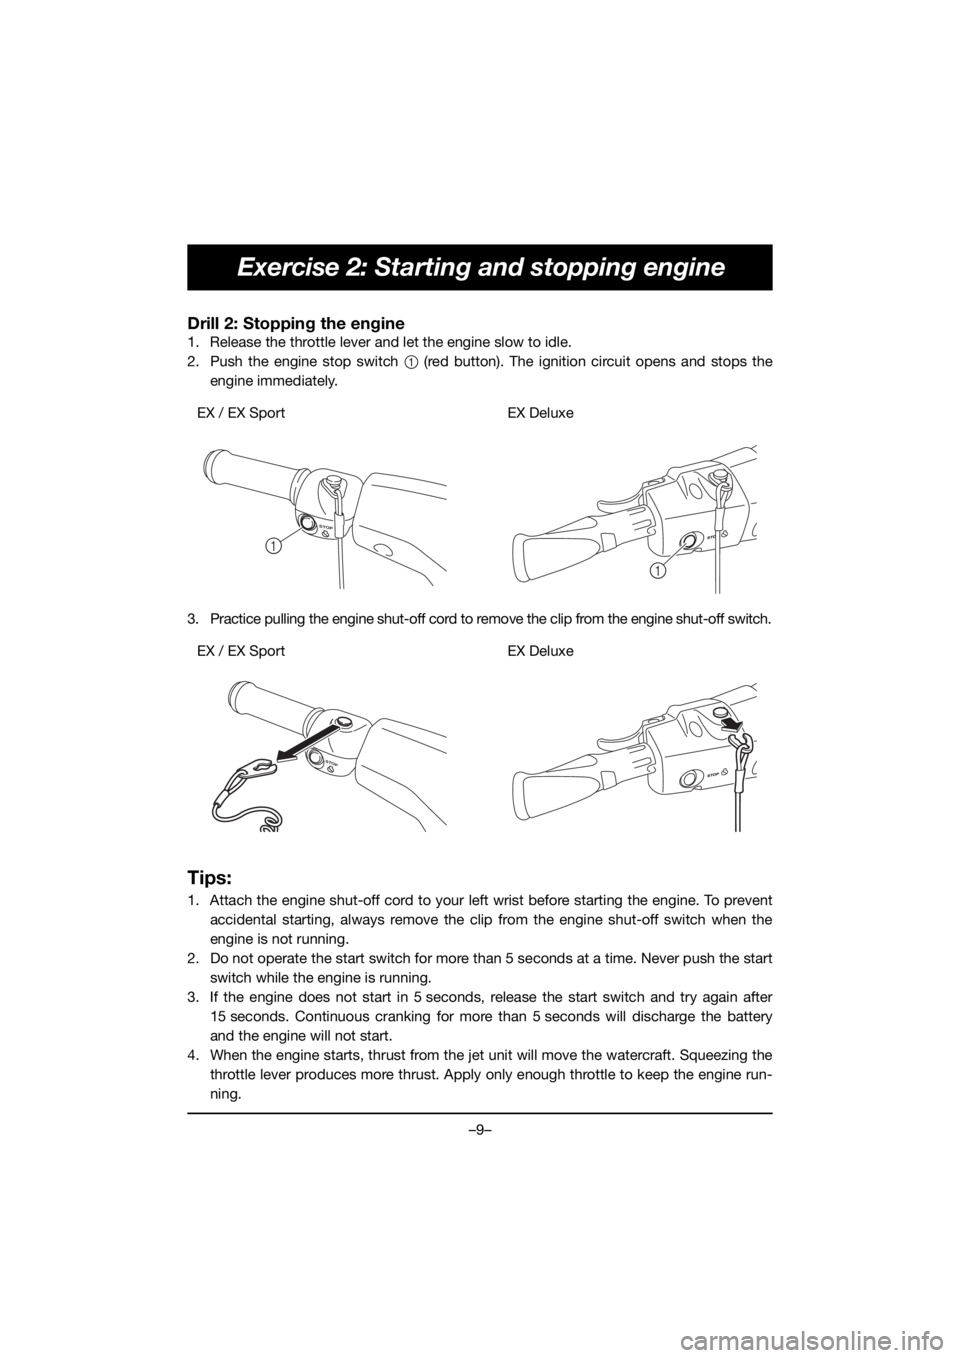 YAMAHA EX SPORT 2020  Manuale duso (in Italian) –9–
Exercise 2: Starting and stopping engine
Drill 2: Stopping the engine
1. Release the throttle lever and let the engine slow to idle.
2. Push the engine stop switch 1 (red button). The ignition